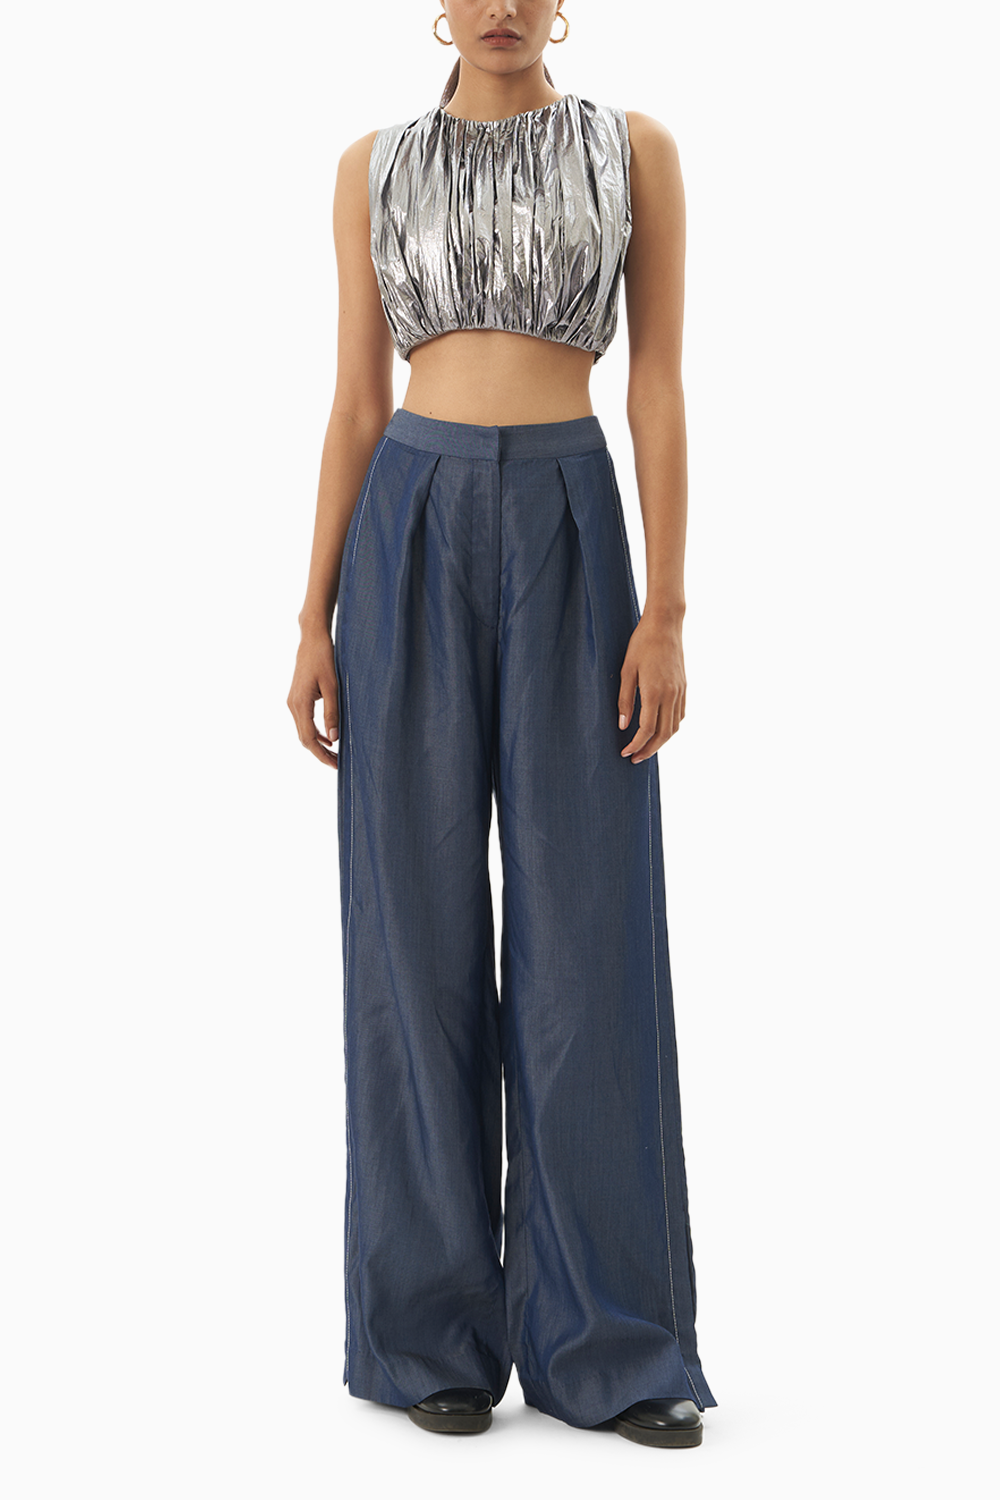 Ruched Foil Top and Denim Trouser